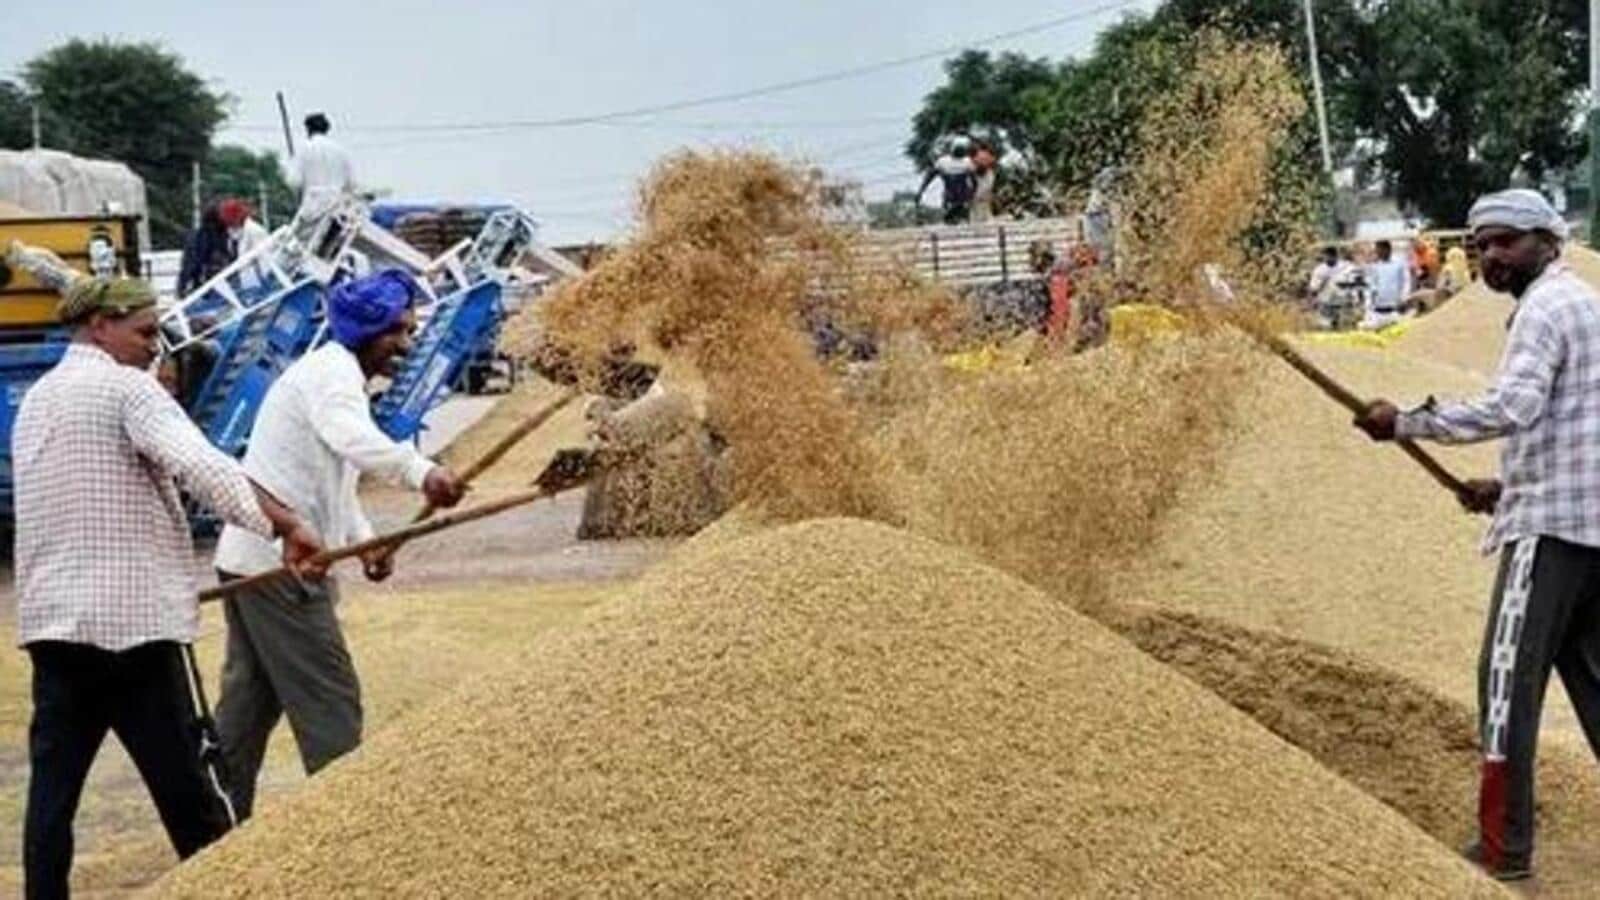 Sufficient Food Grains Stocks Available to Meet the Country’s Requirement: Govt